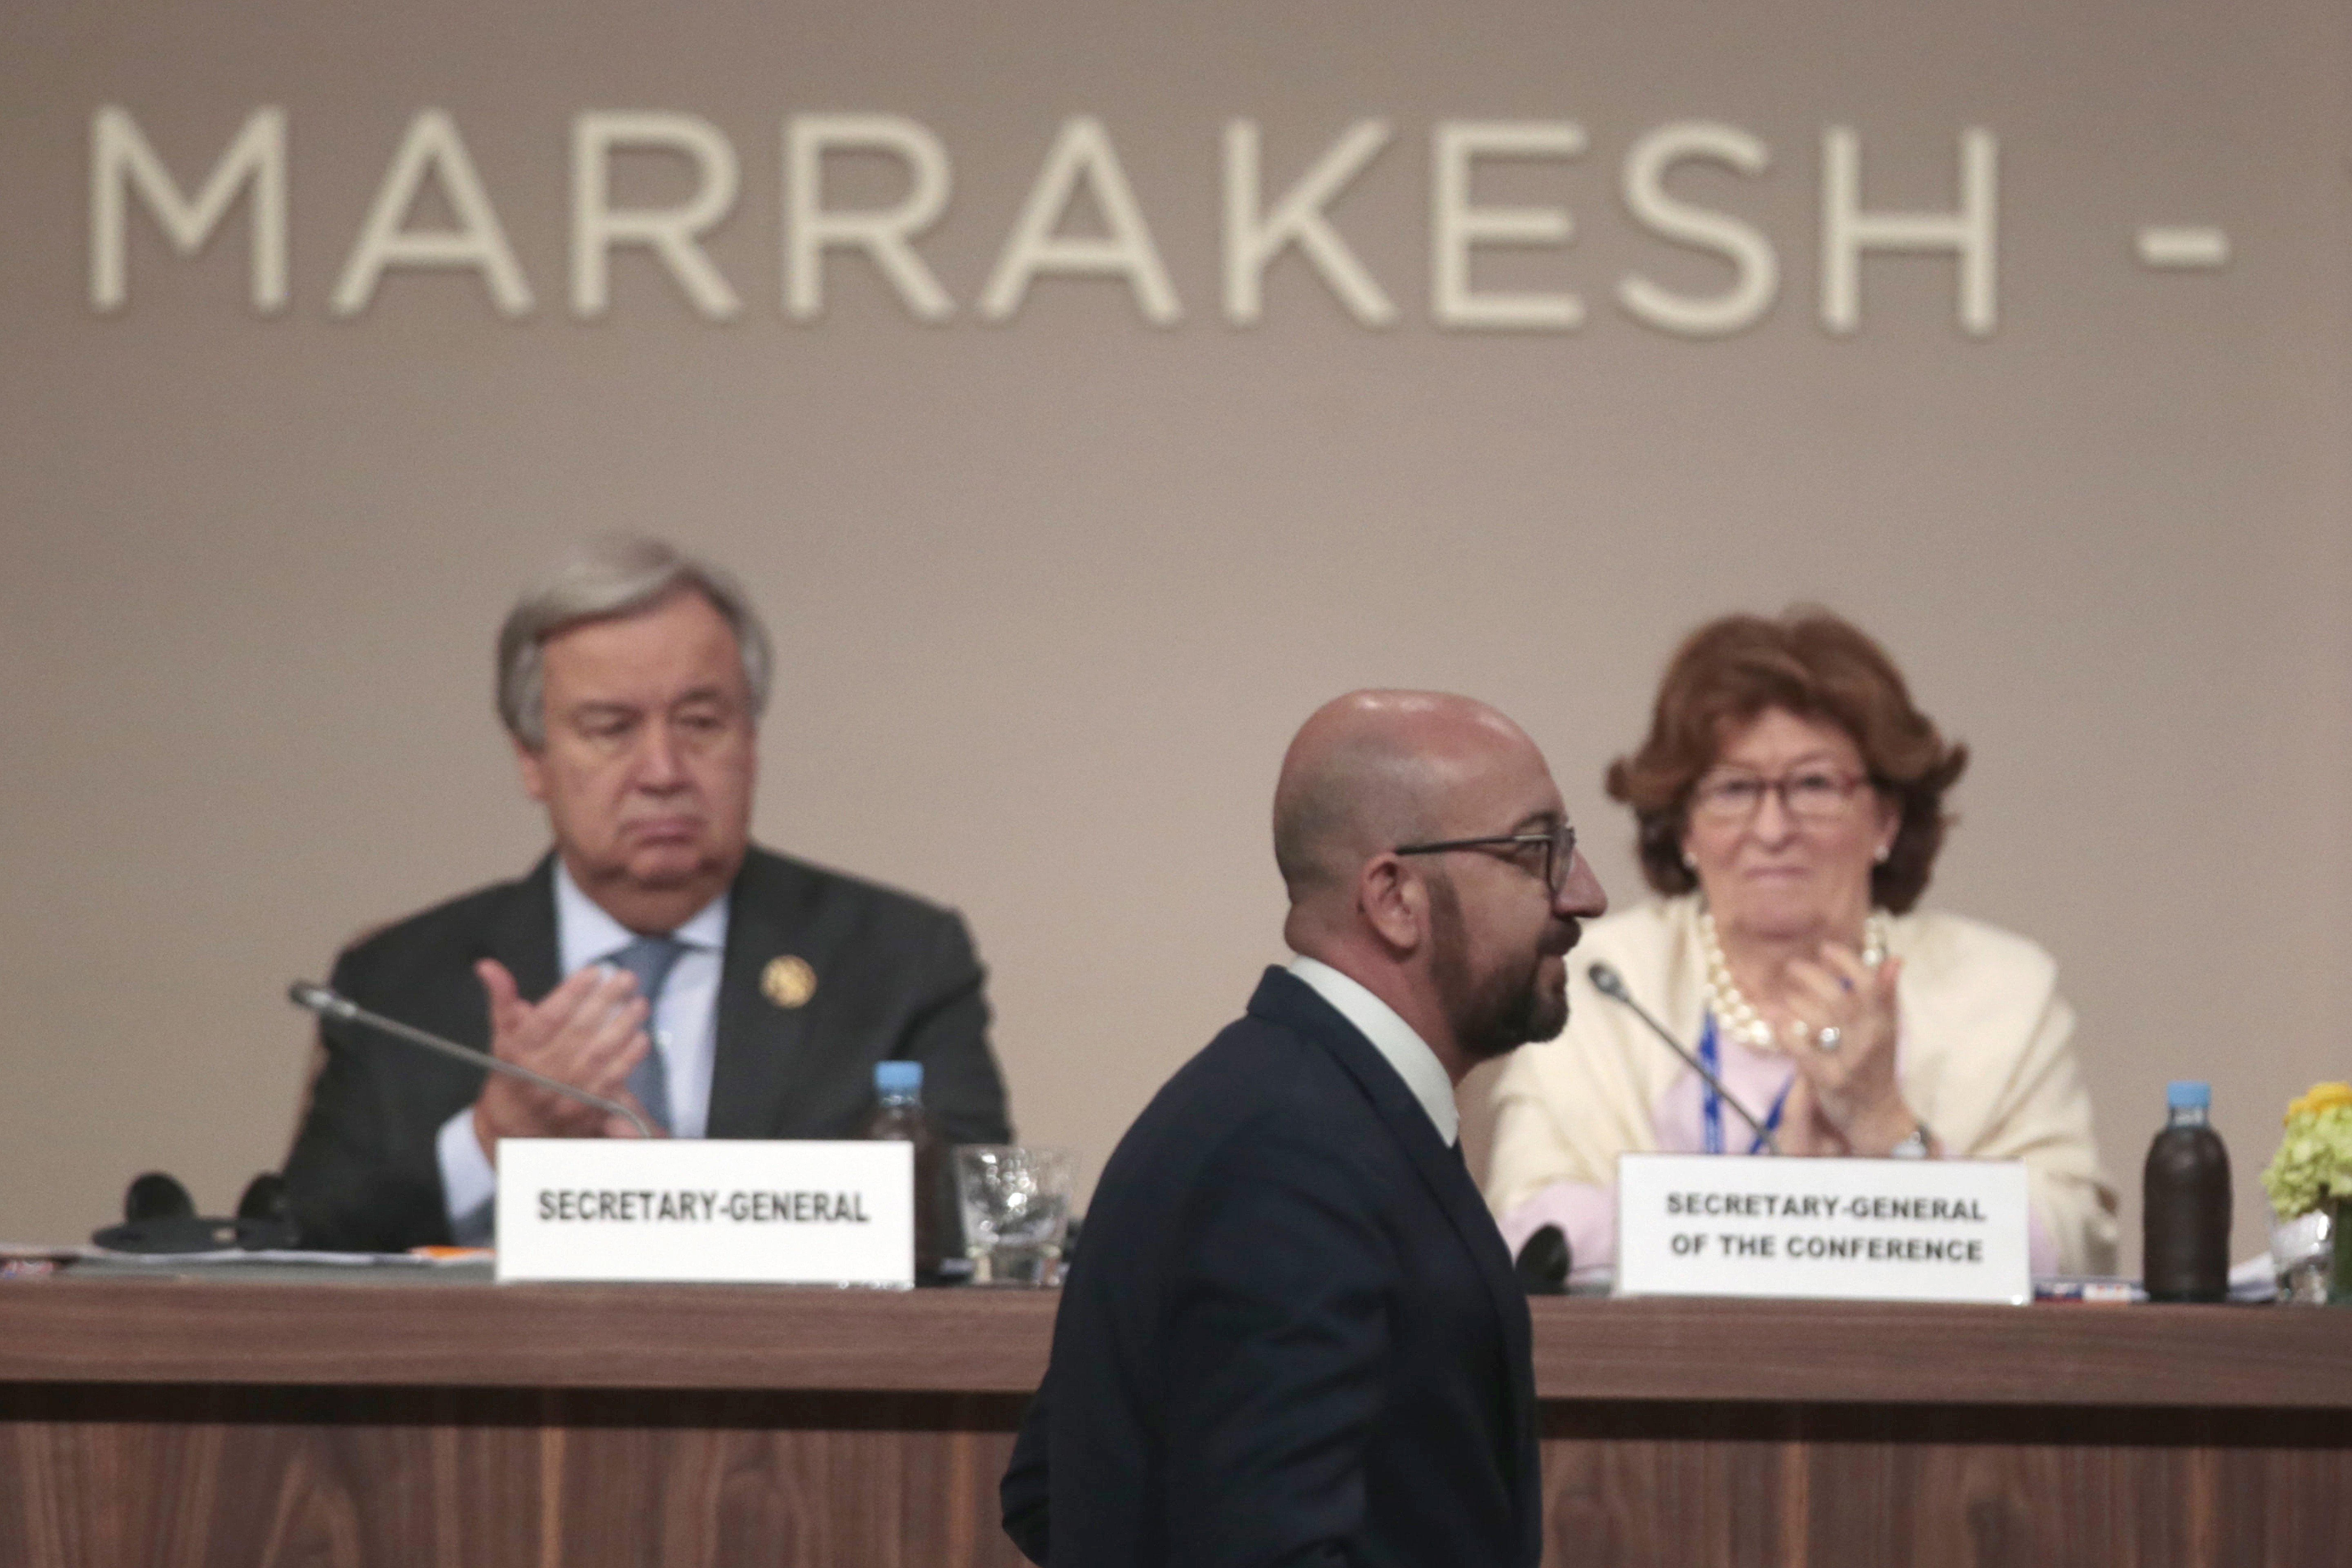 Belgian Prime Minister Charles Michel walks past U.N. Secretary-General Antonio Guterres and Special Representative of the United Nations Secretary-General for International Migration Louise Arbor after addressing delegates during the opening session of a UN Migration Conference in Marrakech, Morocco, Monday, Dec.10, 2018. Top U.N. officials and government leaders from about 150 countries are uniting around an agreement on migration, while finding themselves on the defensive about the non-binding deal amid criticism and a walkout from the United States and some other countries. (AP Photo/Mosa'ab Elshamy)